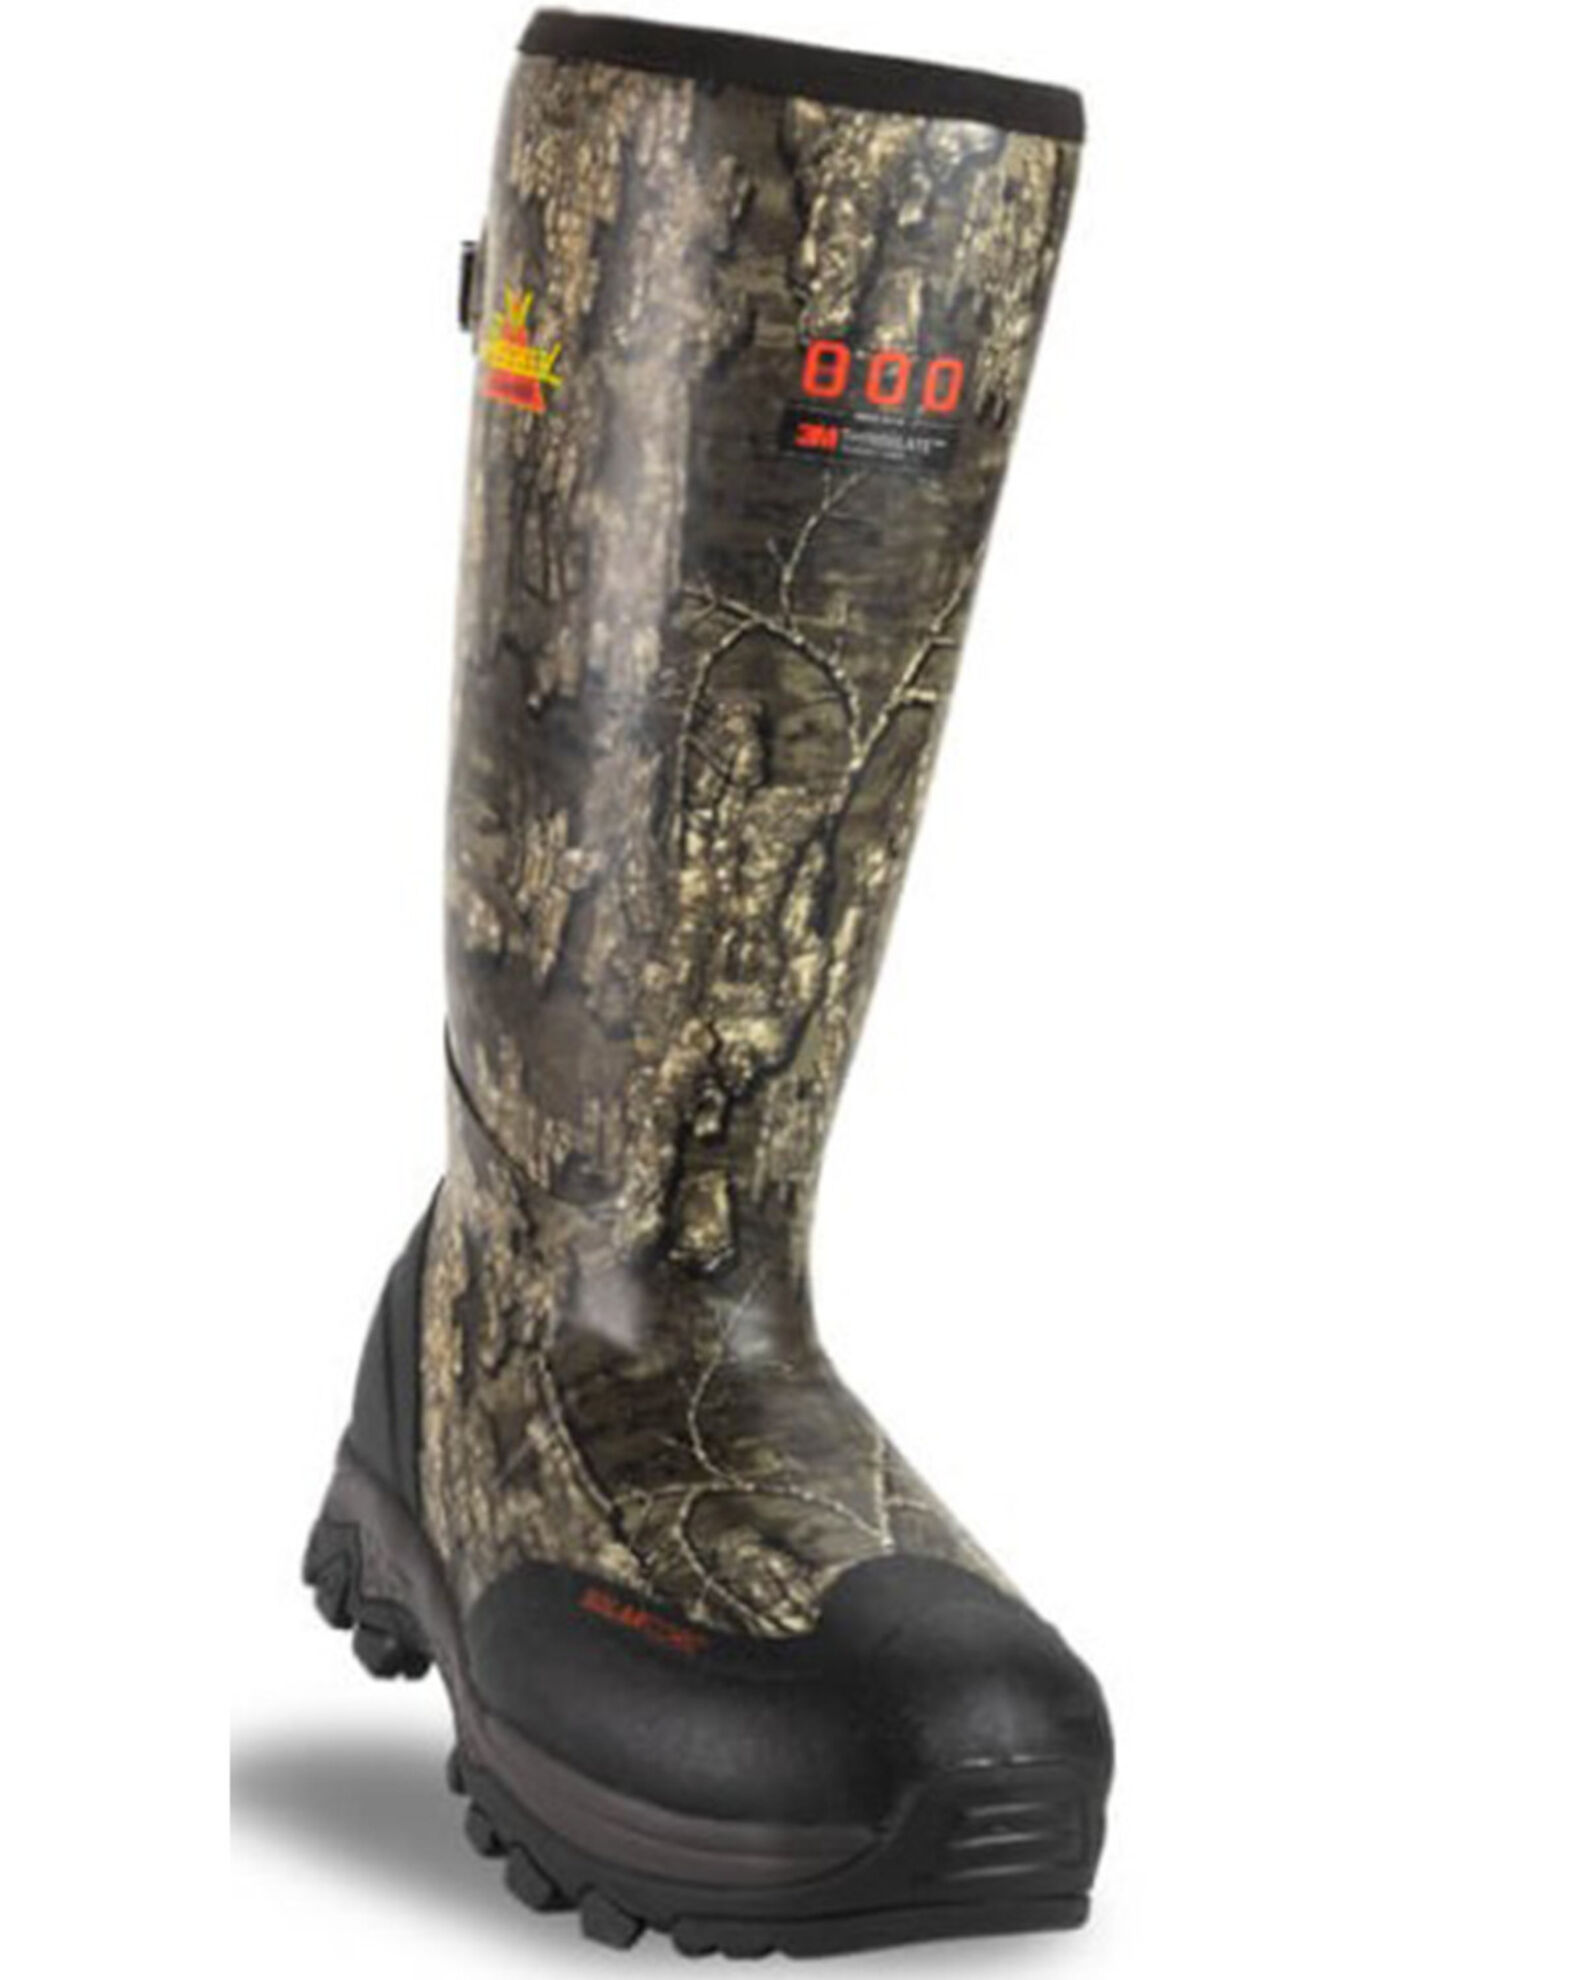 Thorogood Men's Infinity Realtree Timber Rubber Boots - Soft Toe